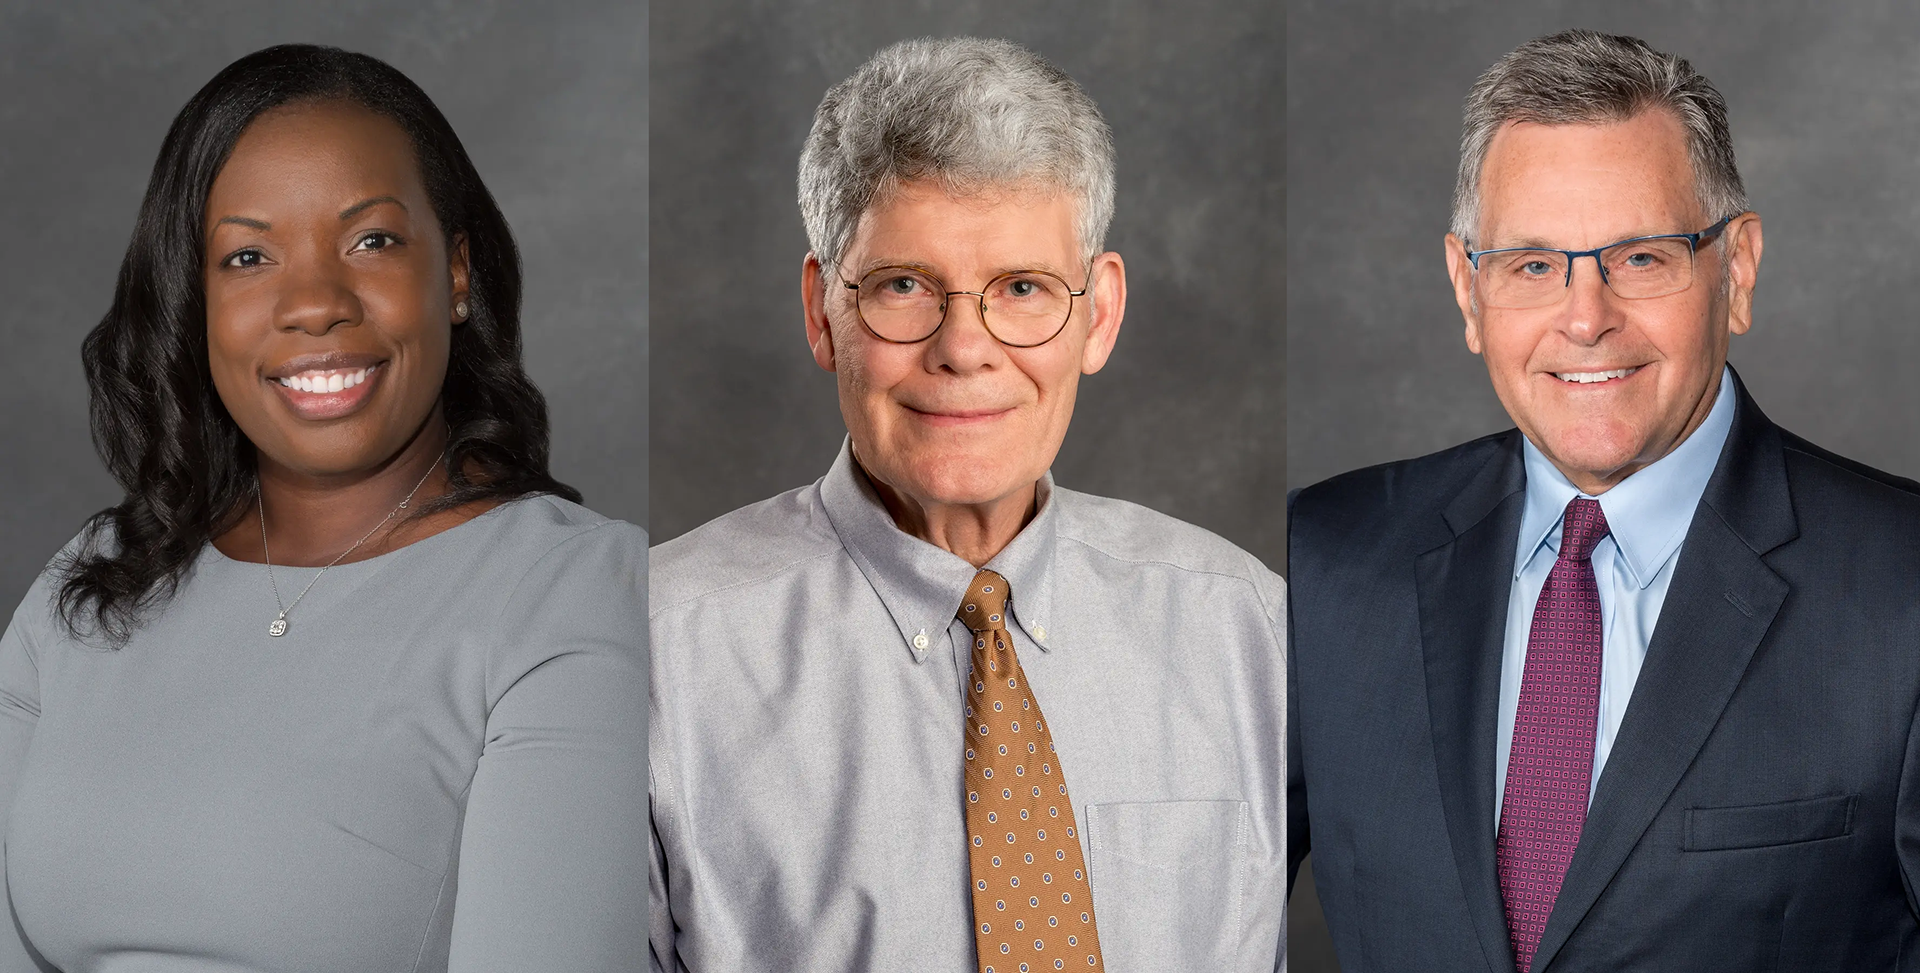 (From left to right) Anika Hines, Ph.D., M.P.H., Michael Miles, M.D., Ph.D., and Curtis Sessler, M.D.